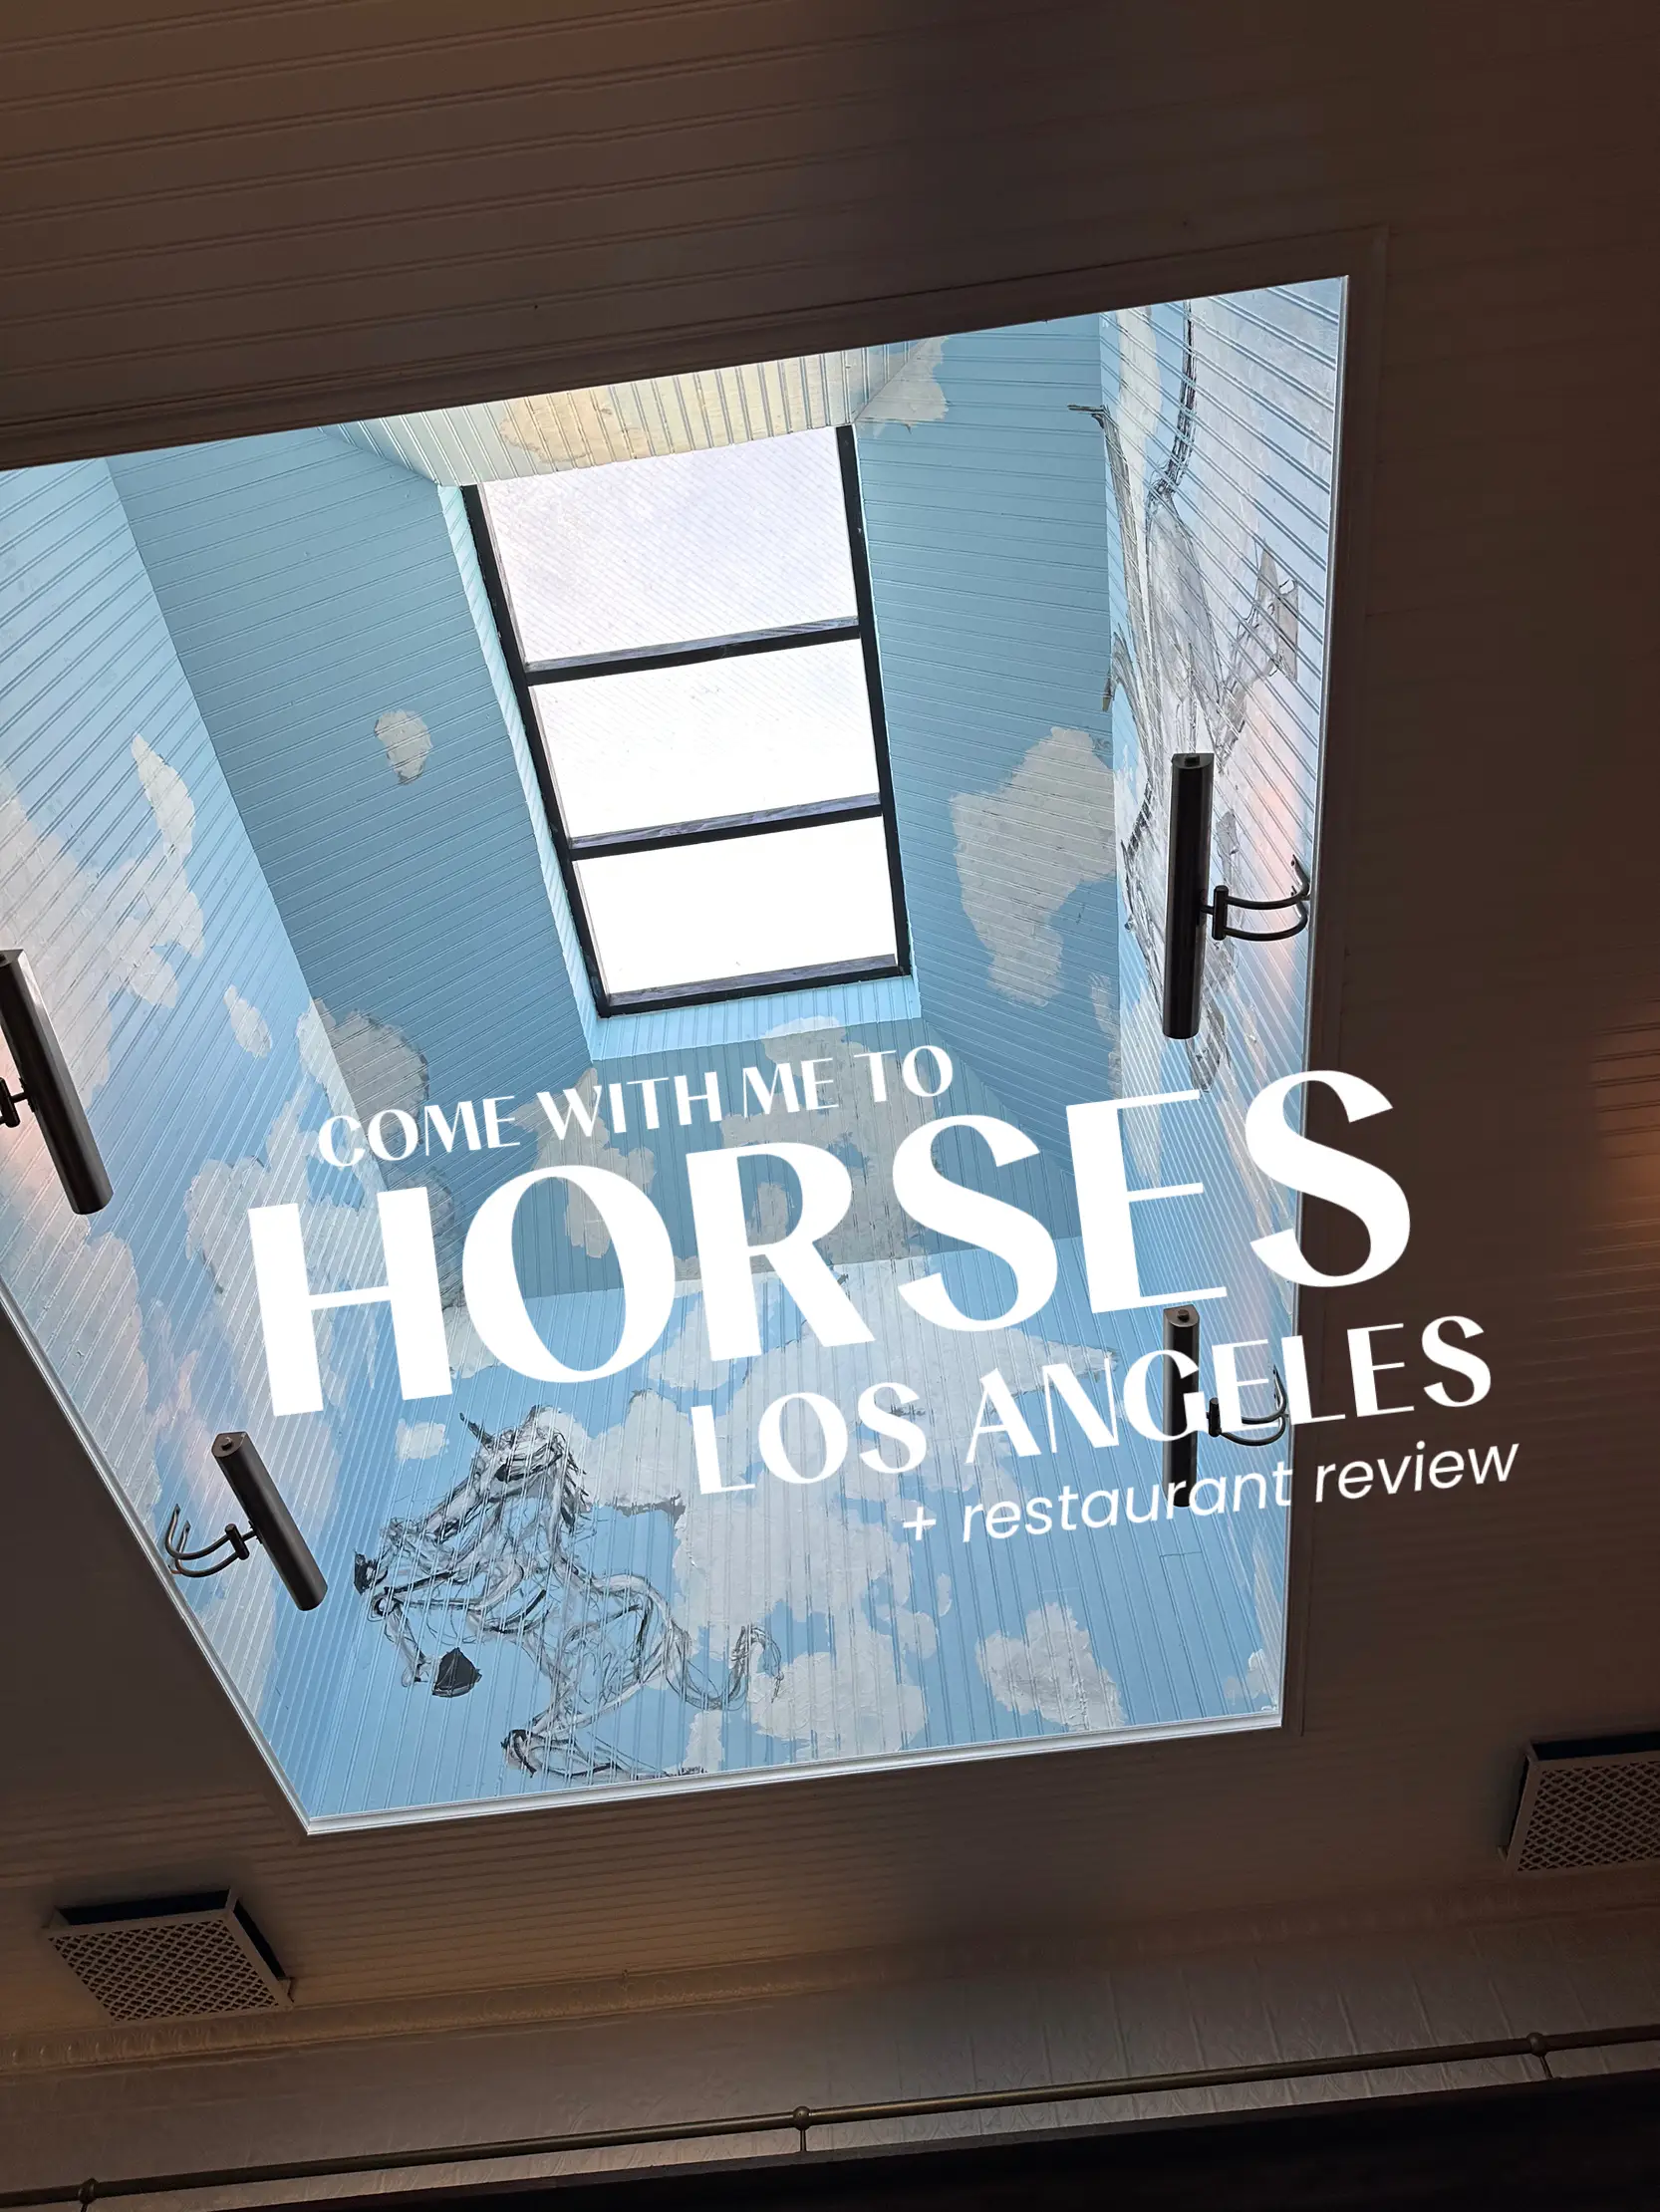 Horses 🐎 Los Angeles Review 's images